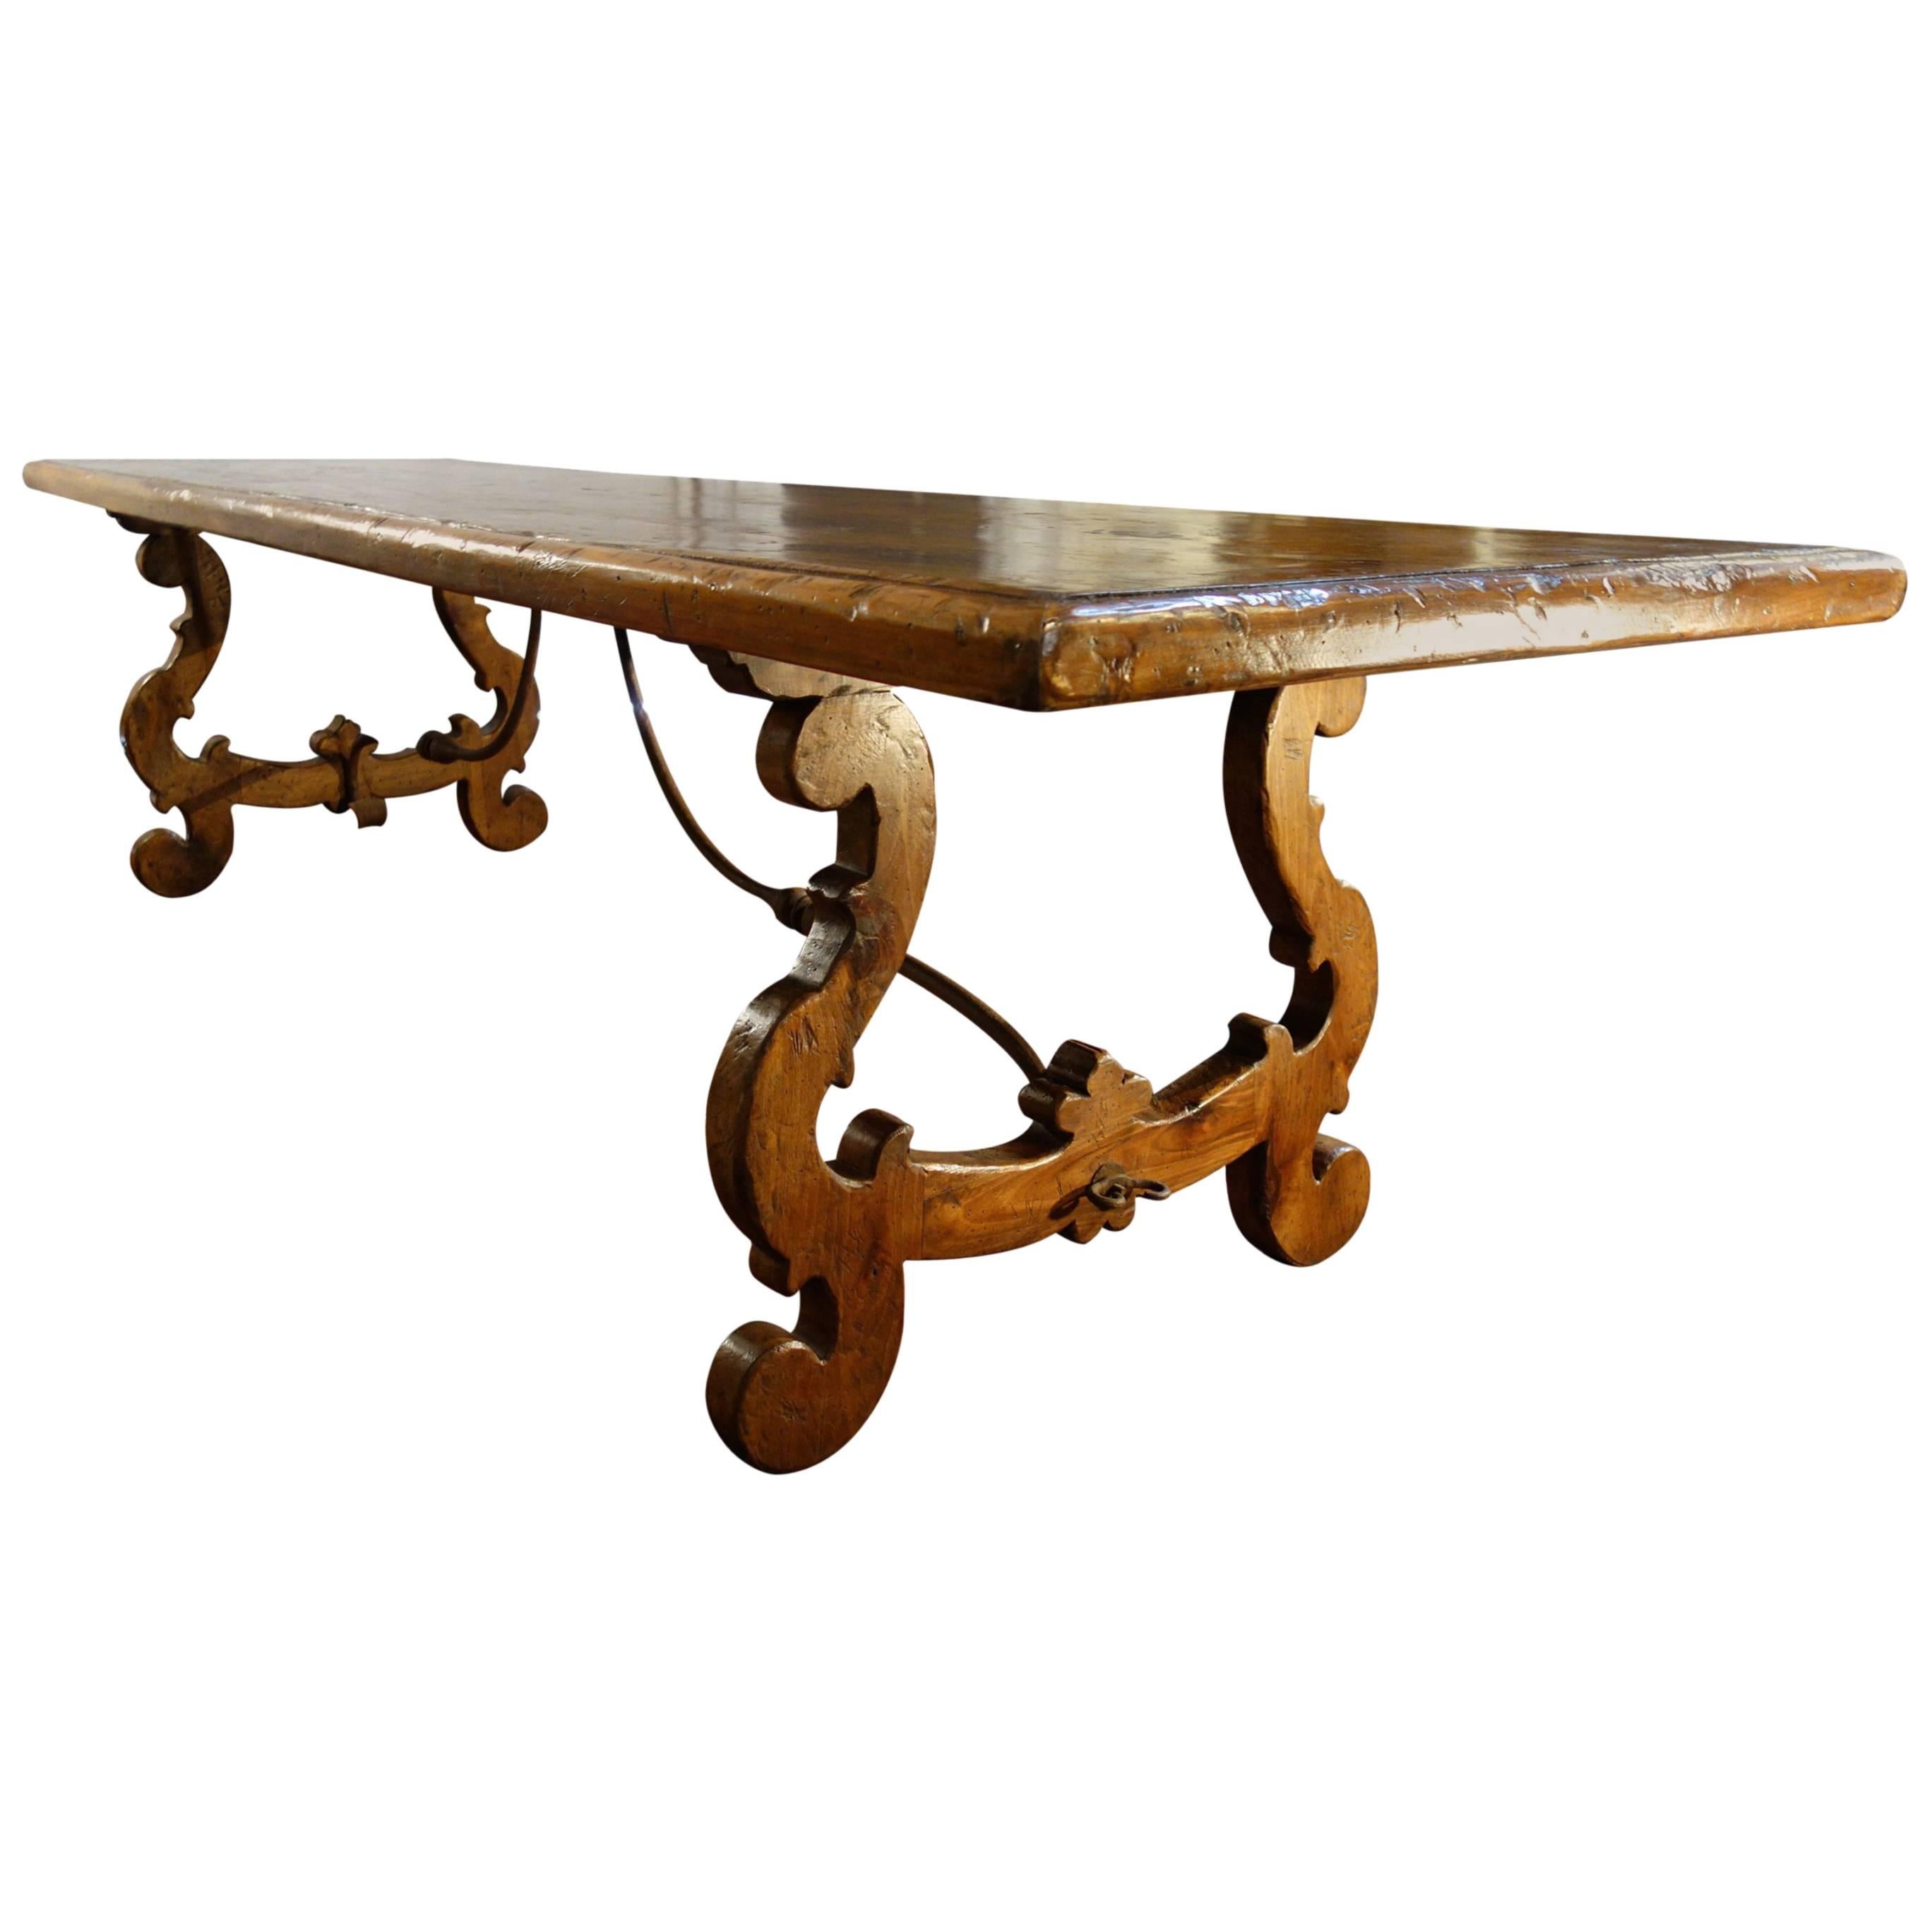 The exceptional Italian art and handcraft of fine antique reproduction is exhibited in this classic refectory style dining table named 